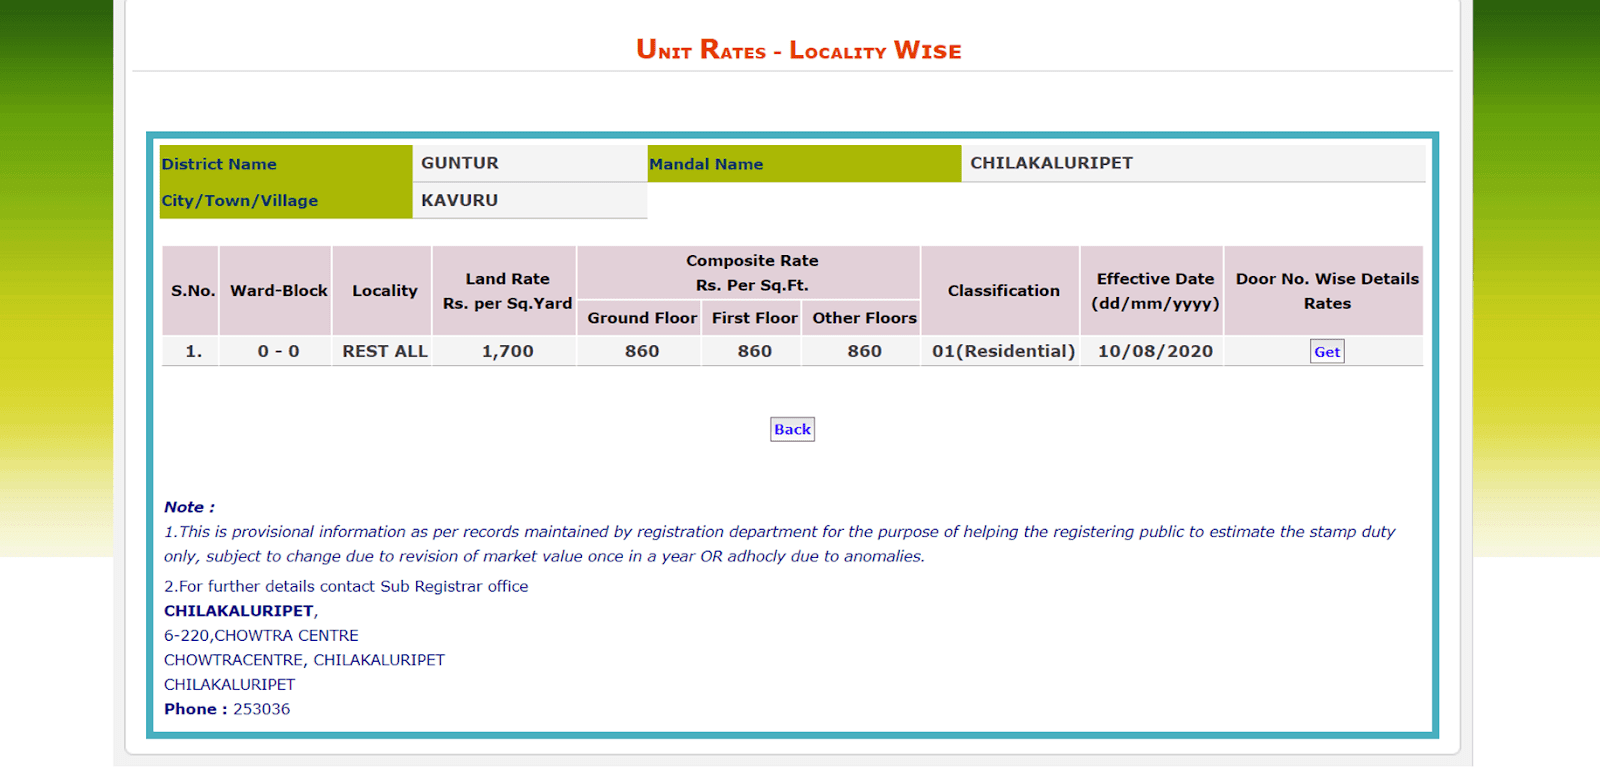 Check AP Unit Rates - Locality Wise